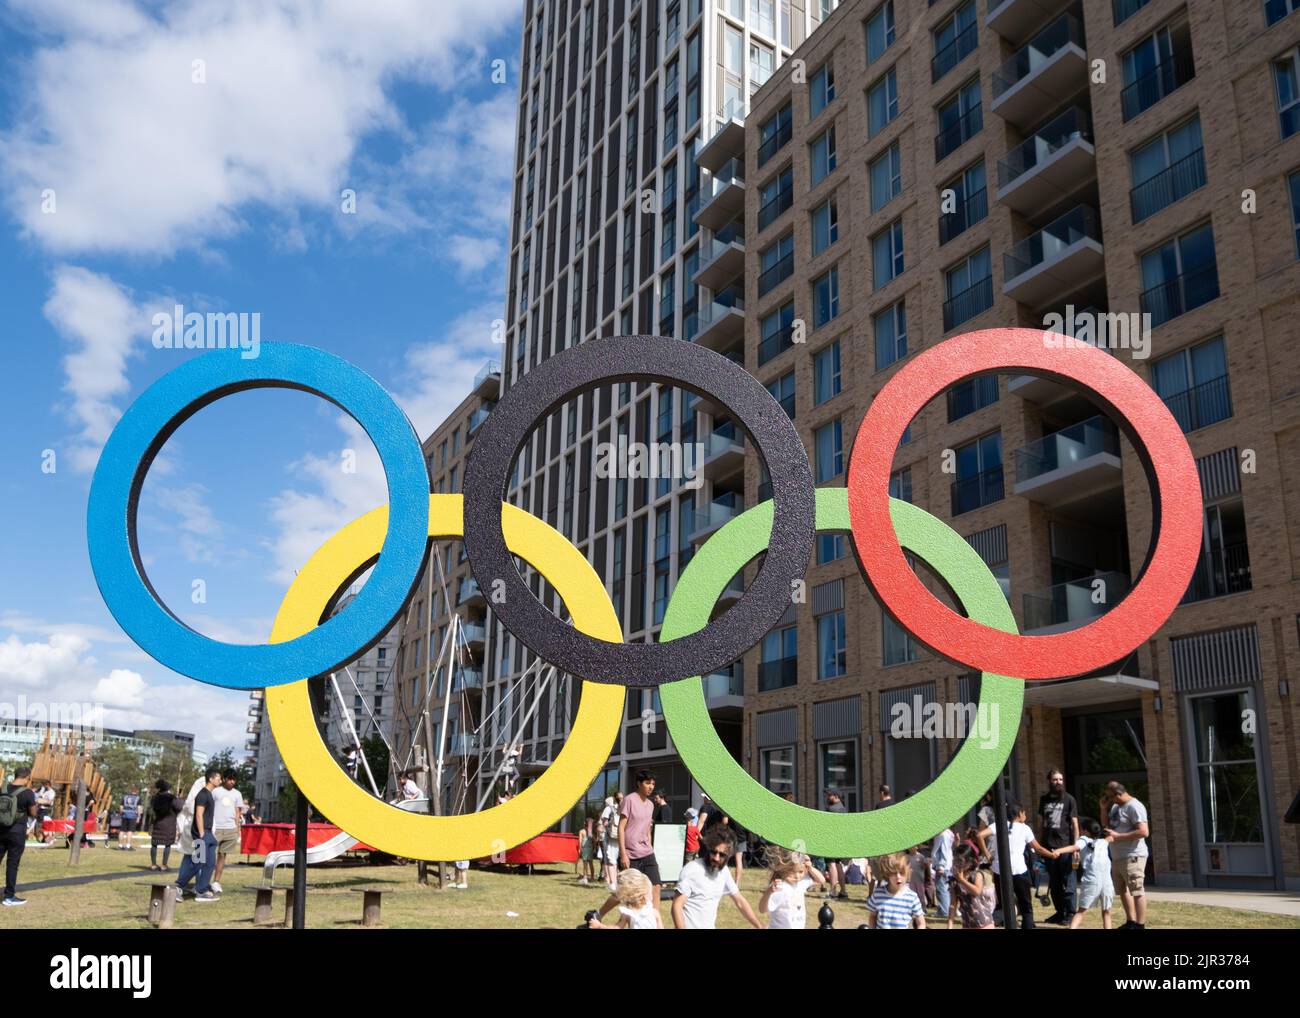 Olympic Rings, E20 Summer Fete, celebrating the 10 year anniversary of London 2012 Olympics where East Village was home too 17,000 athletes. UK Stock Photo